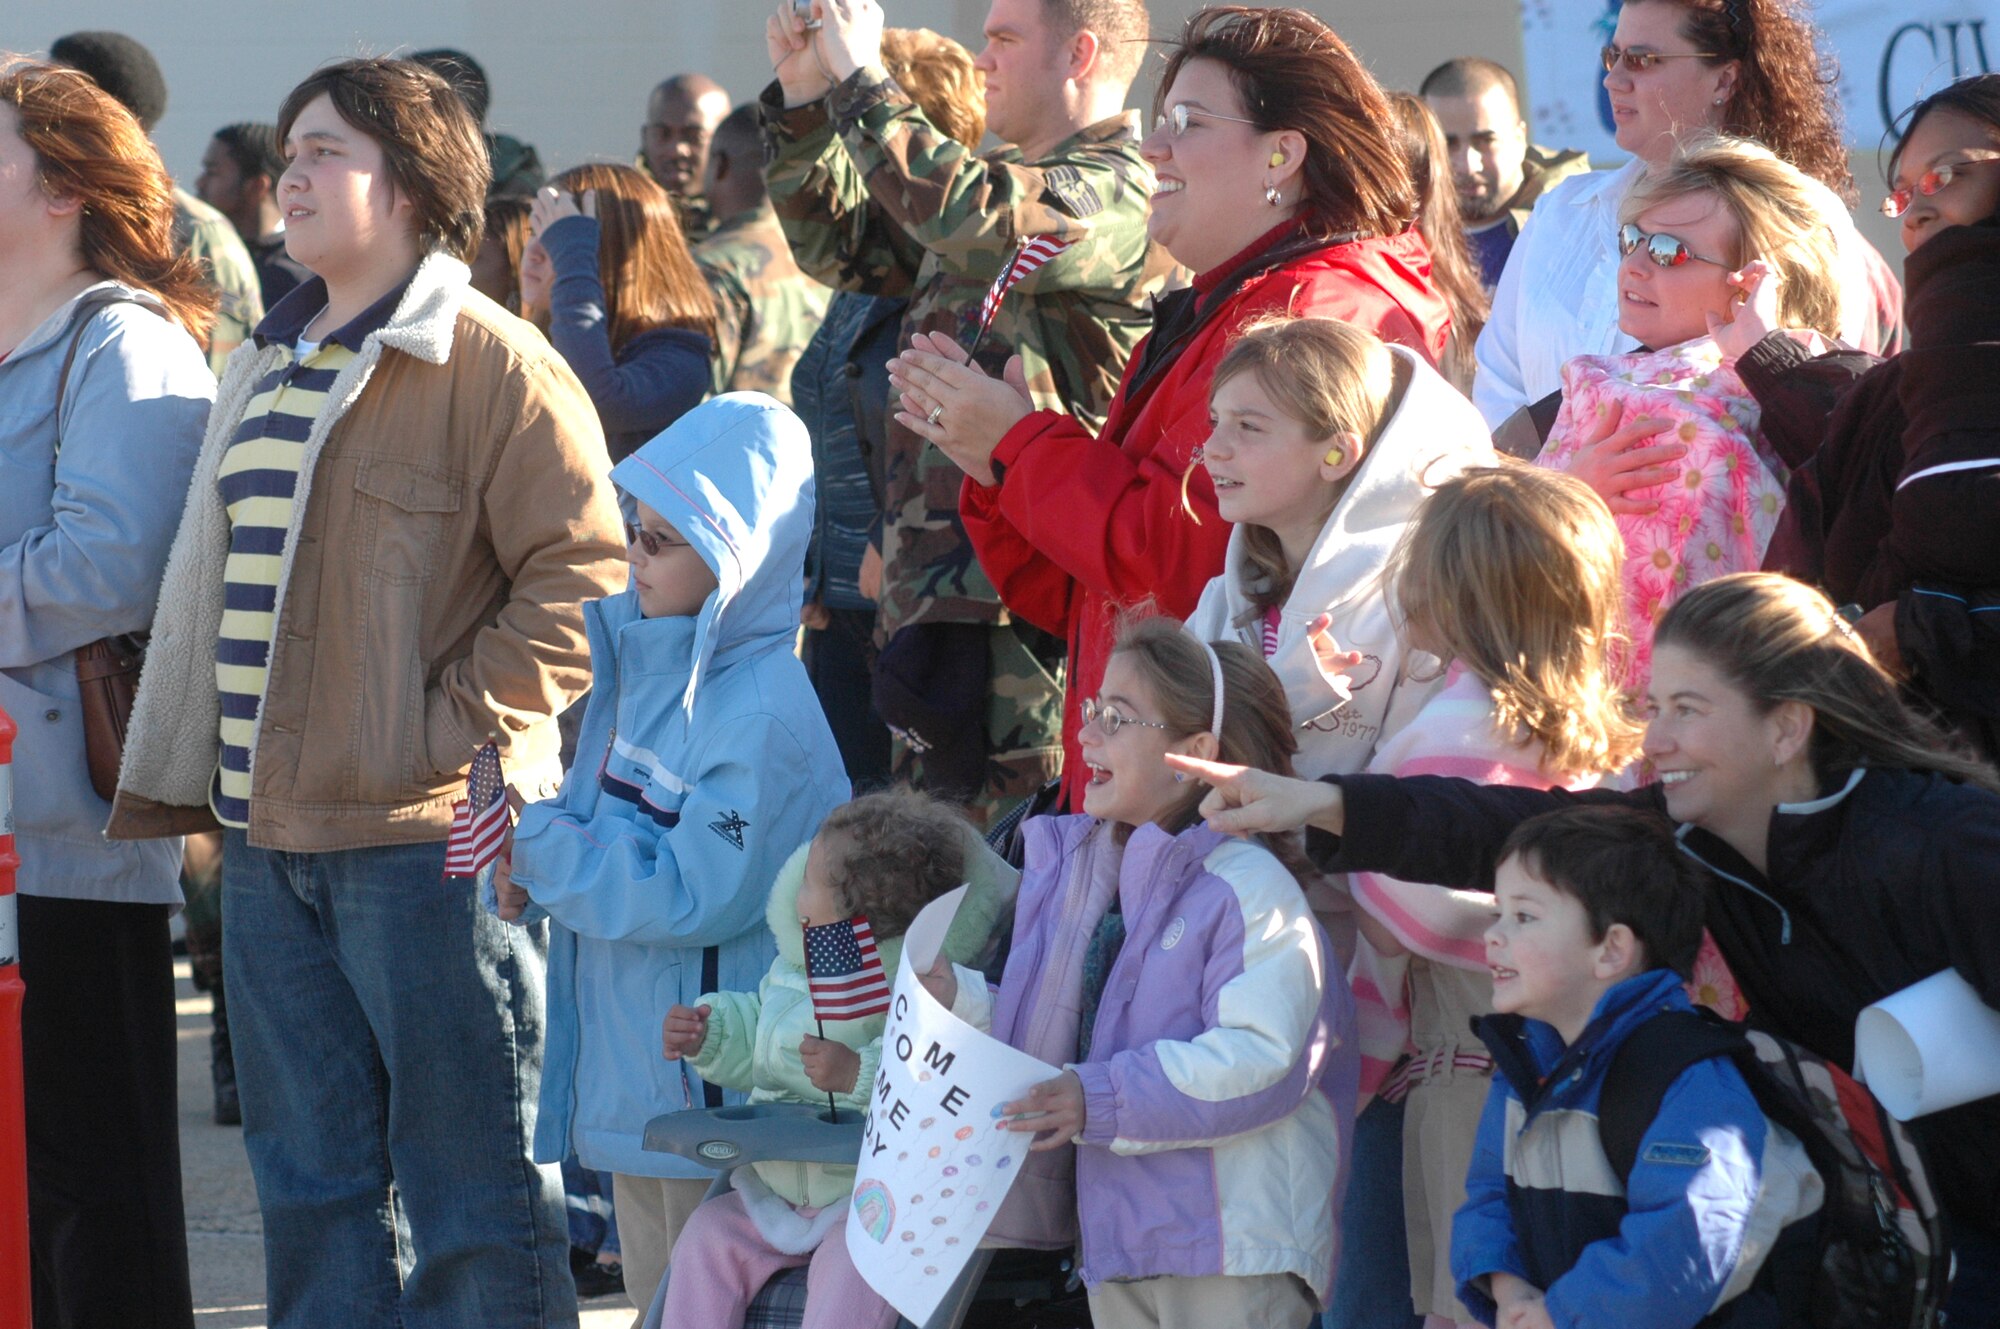 Family and friends of the returning Airmen show their excitement as the aircraft comes into view.
U.S. Air Force photo by SUE SAPP